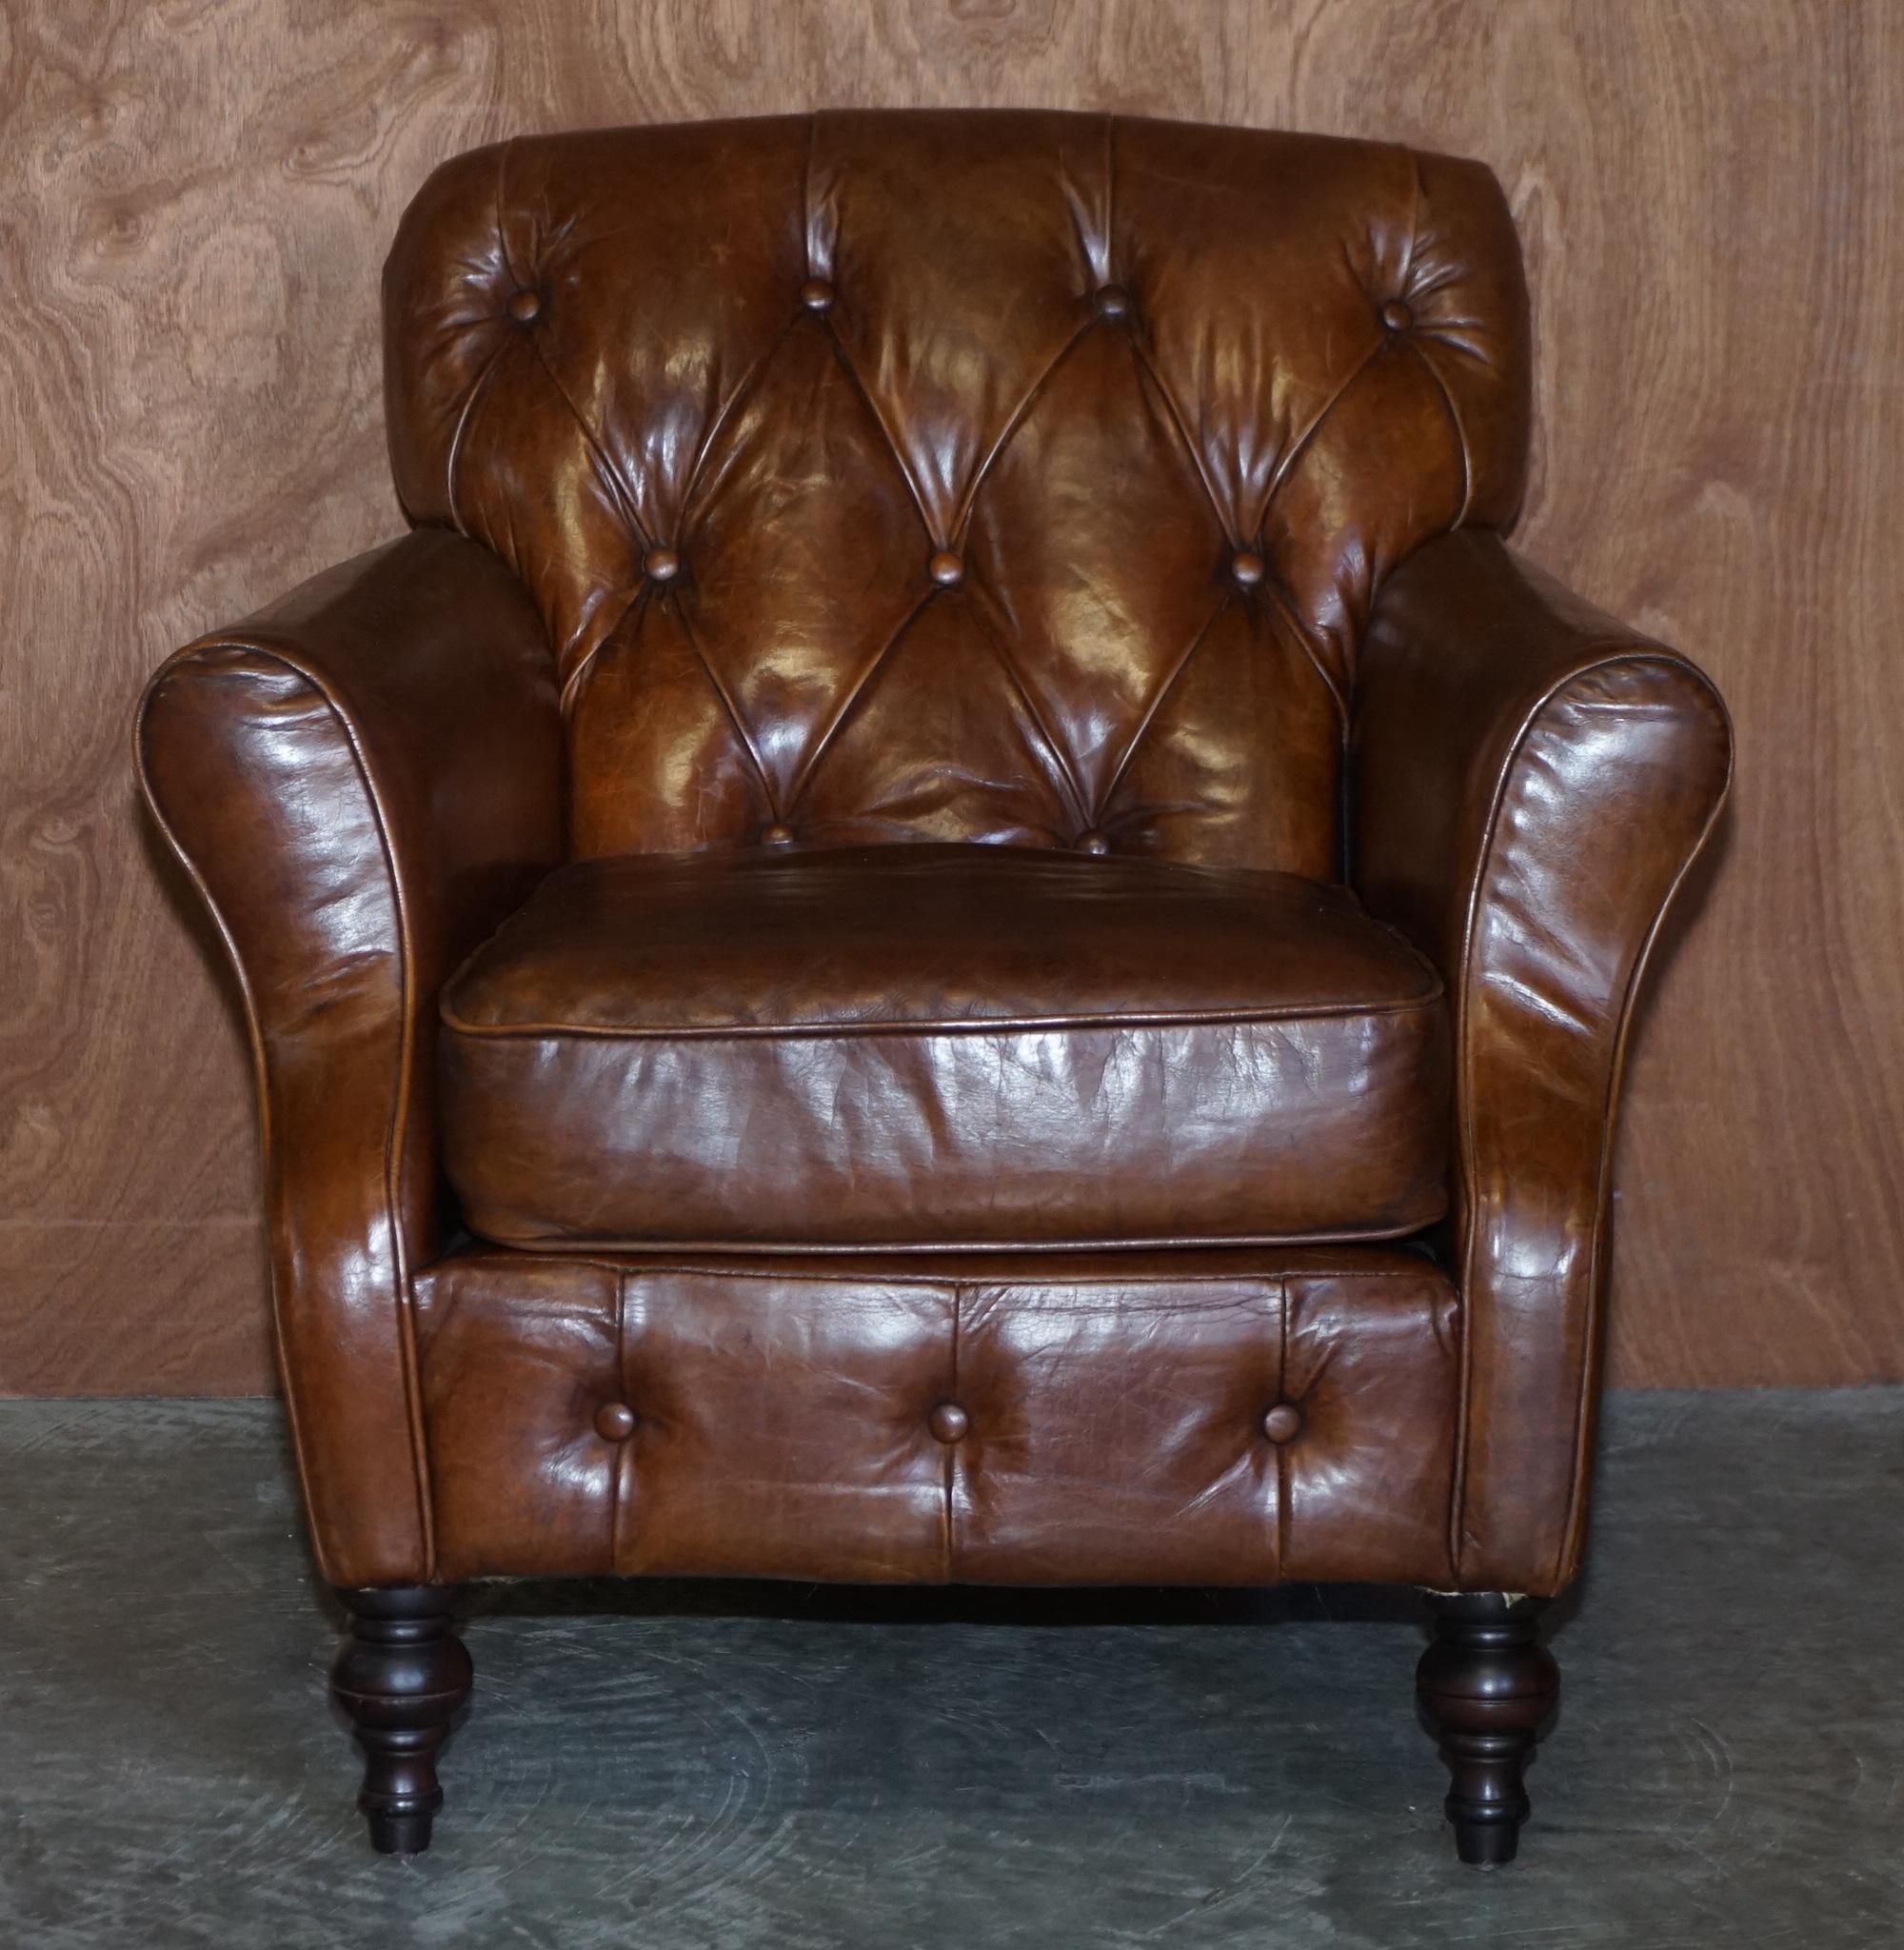 We are delighted to offer for sale this lovely vintage heritage brown leather Chesterfield tufted armchair 

A good looking, well made and comfortable armchair, upholstered with heritage leather which is designed to look 100 years old from new, it